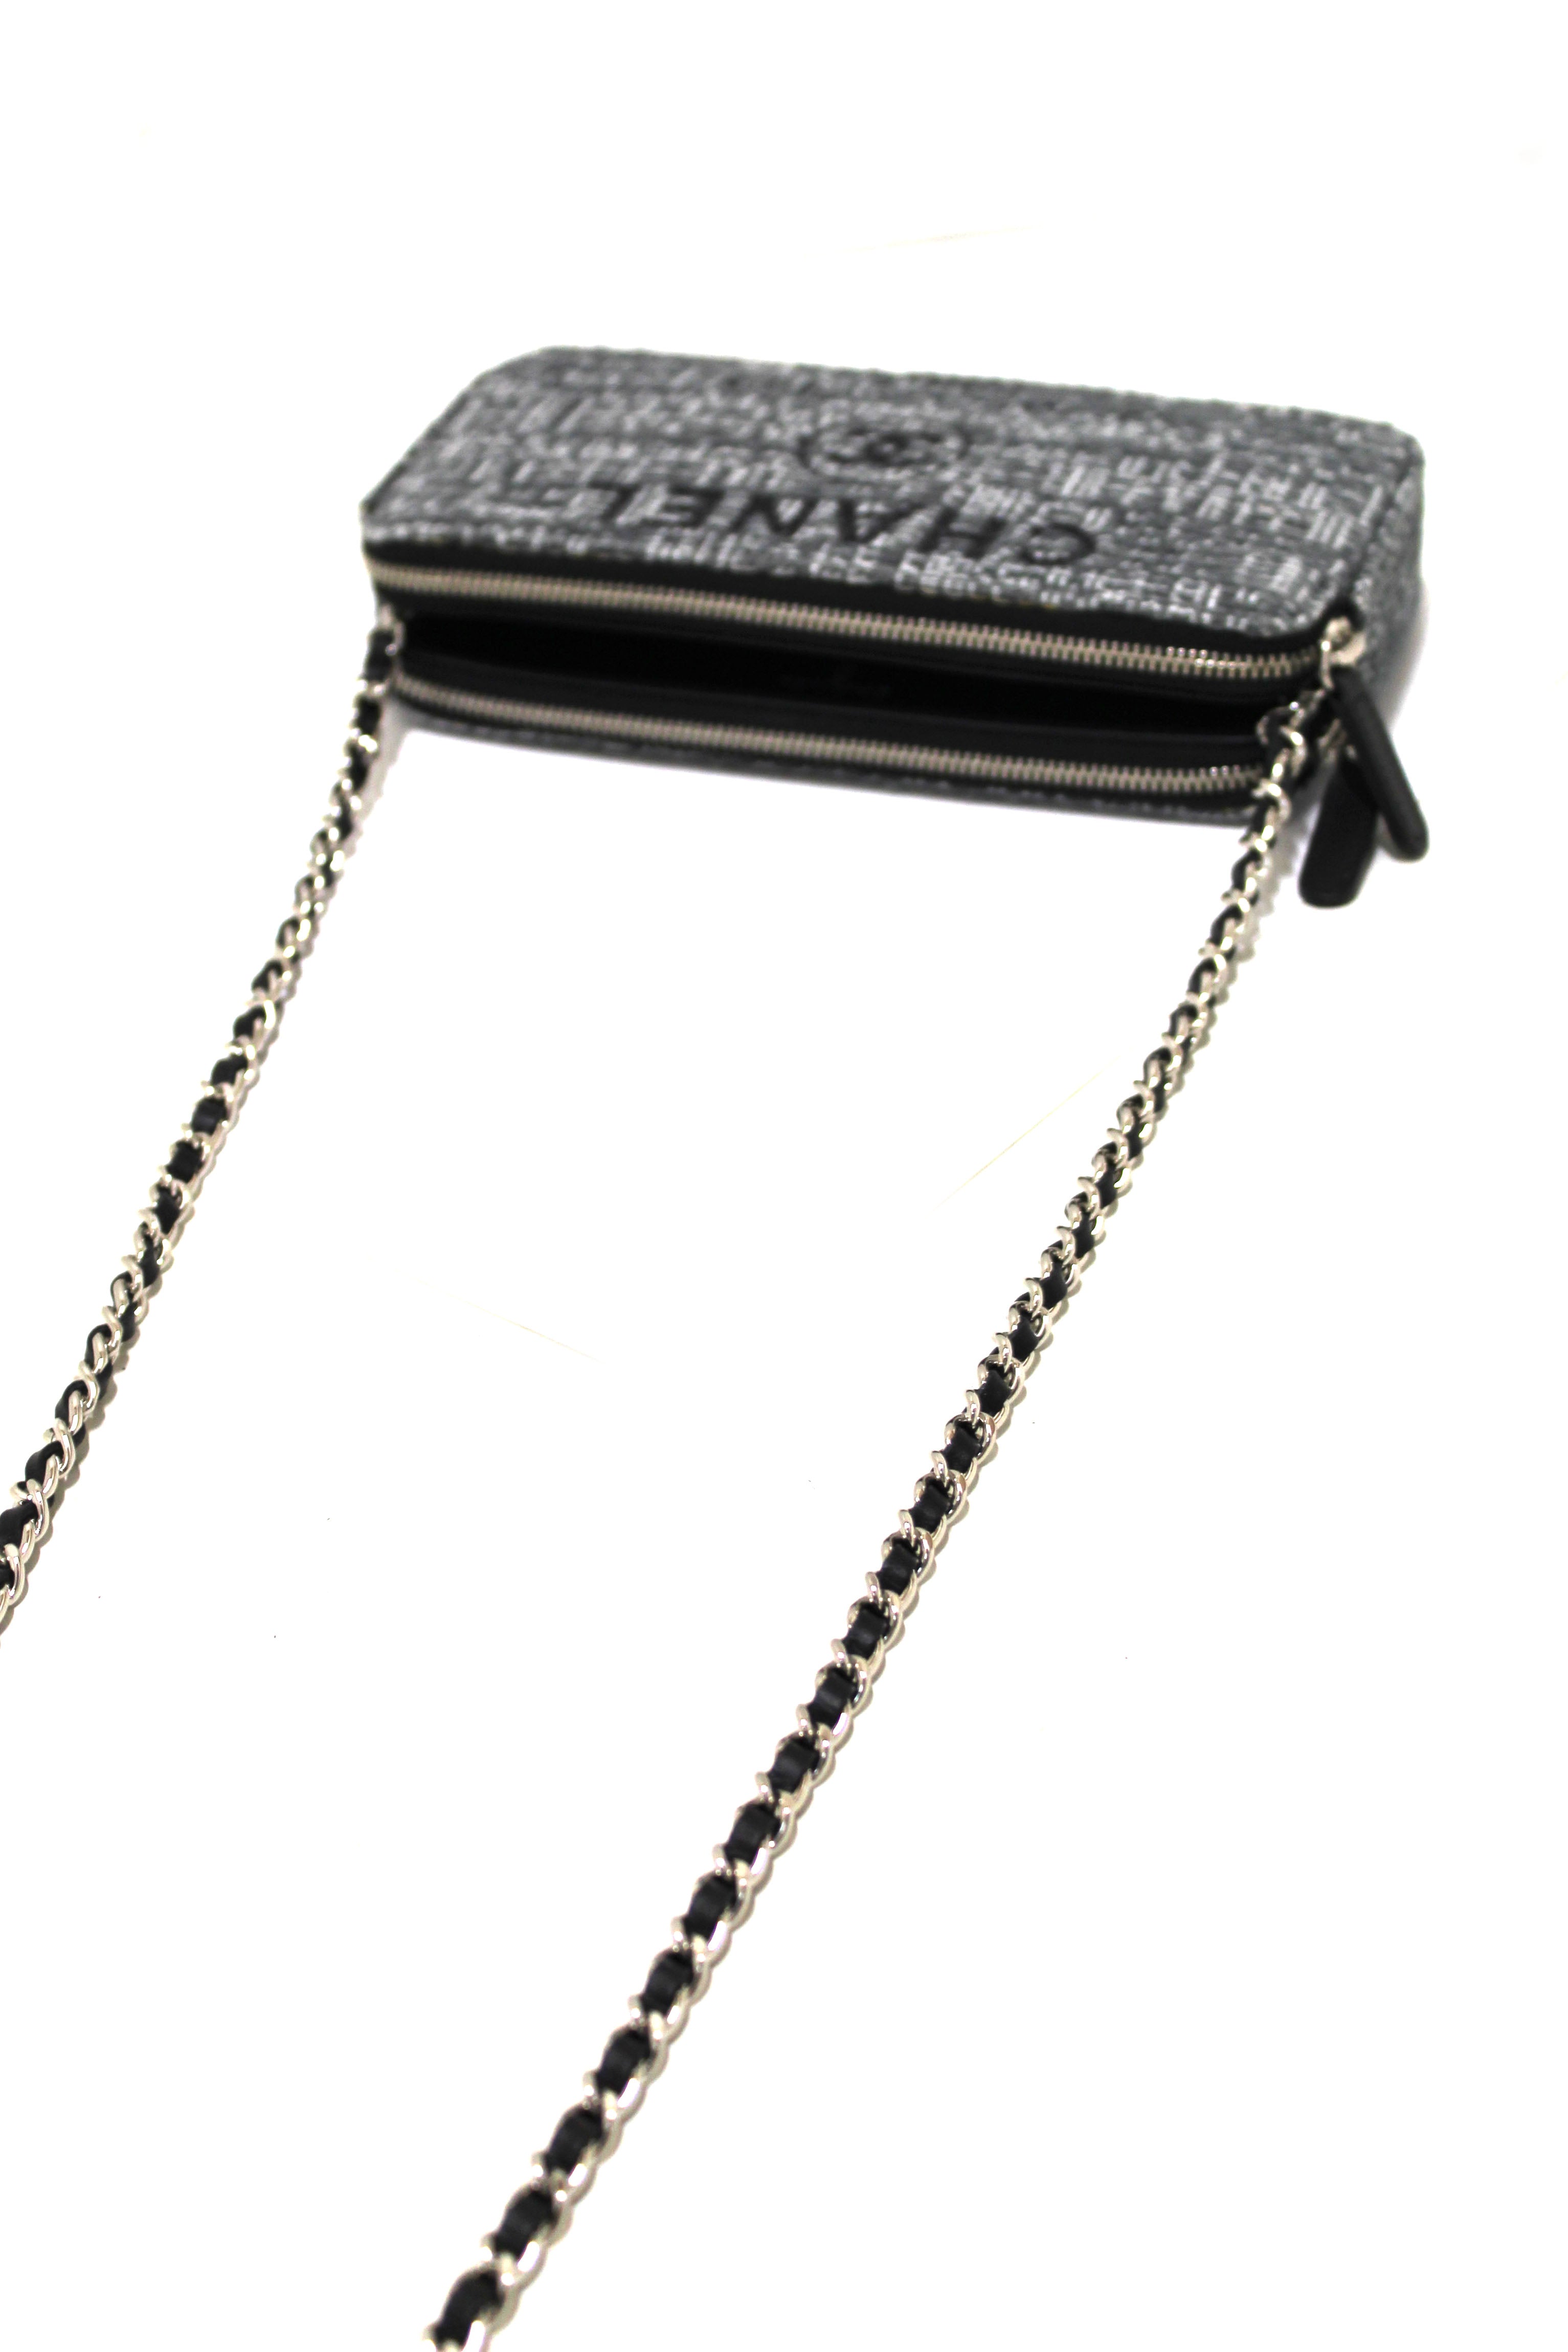 Authentic Chanel Grey Tweed Canvas Double Zip Wallet on Chain